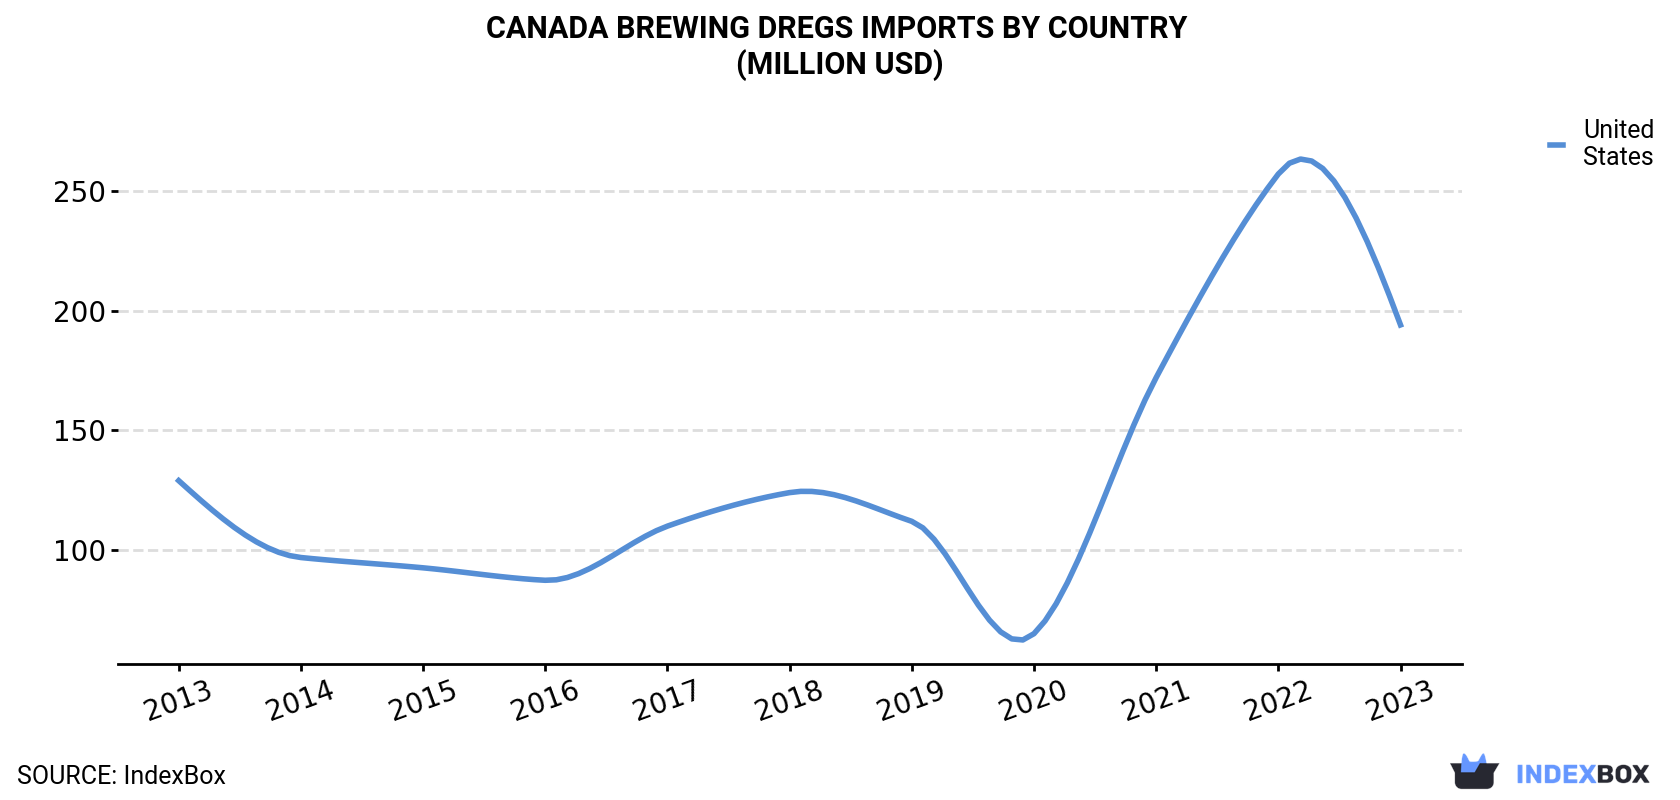 Canada Brewing Dregs Imports By Country (Million USD)